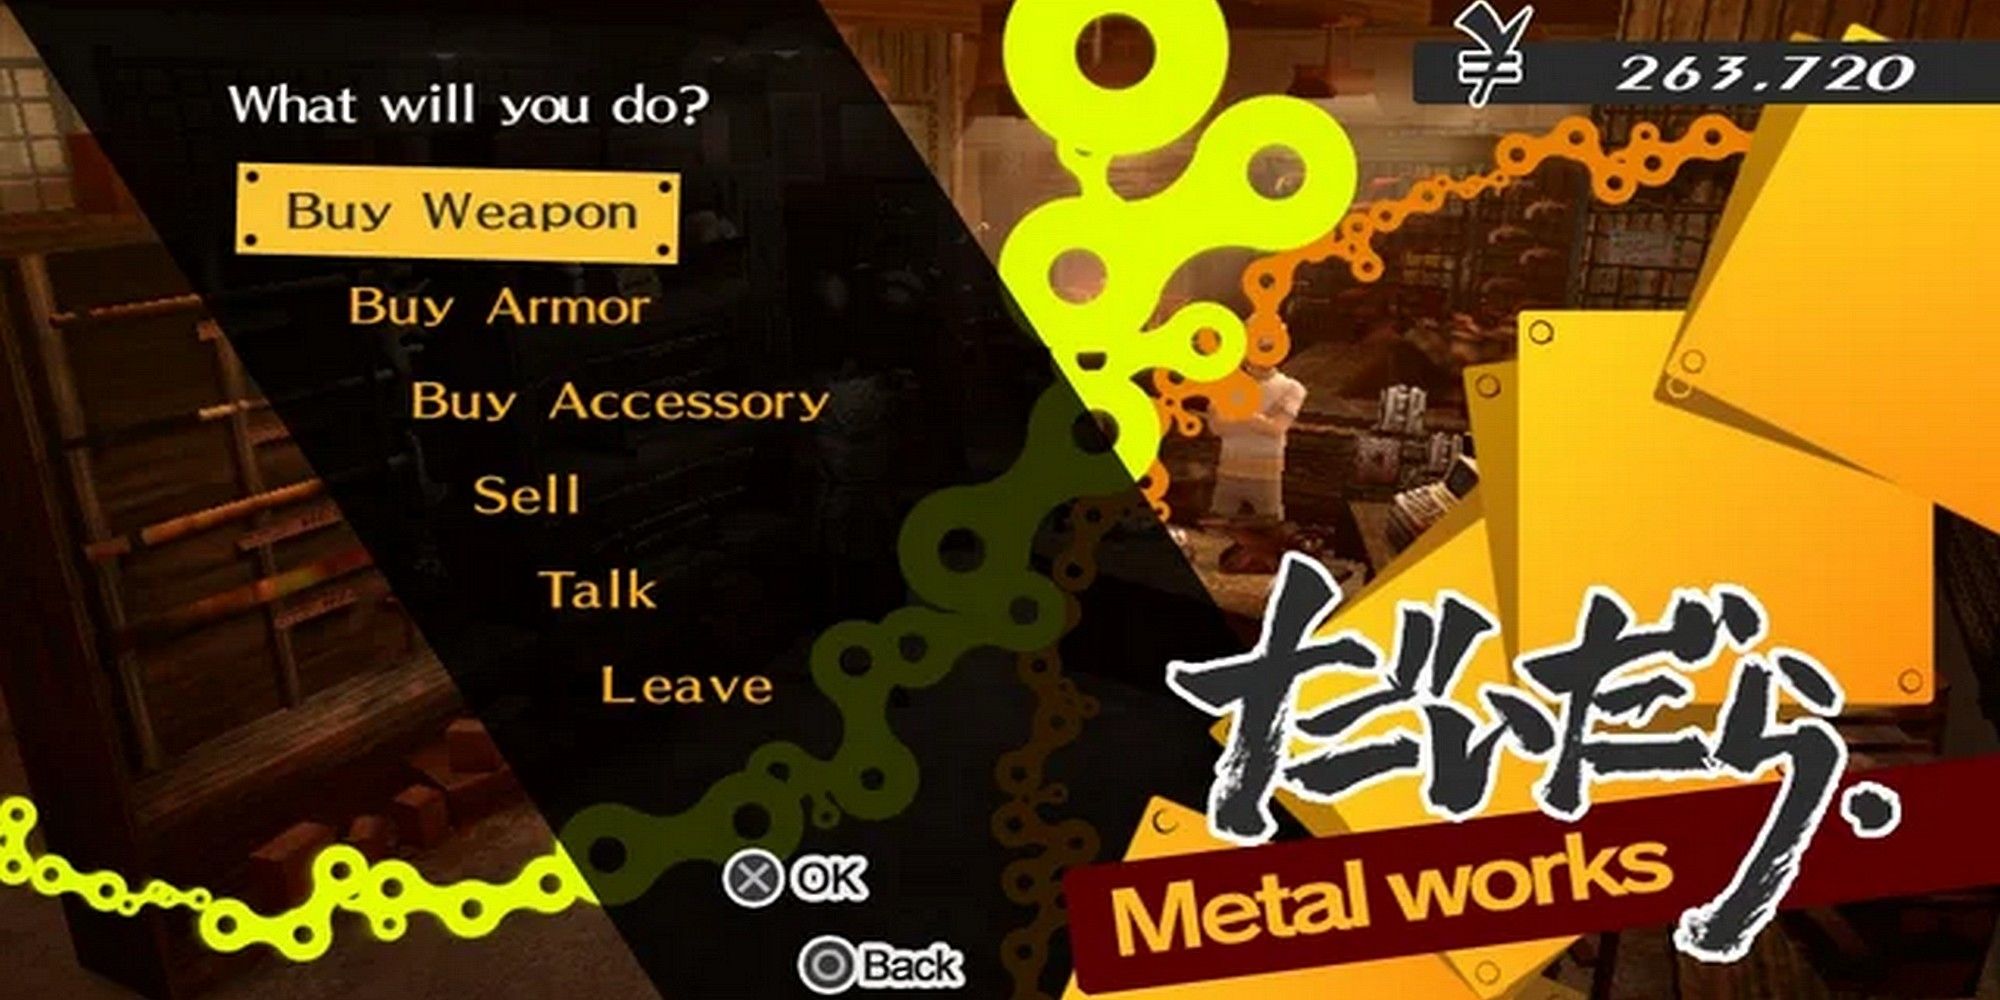 The menu for the Metalworks shop in Persona 4 Golden